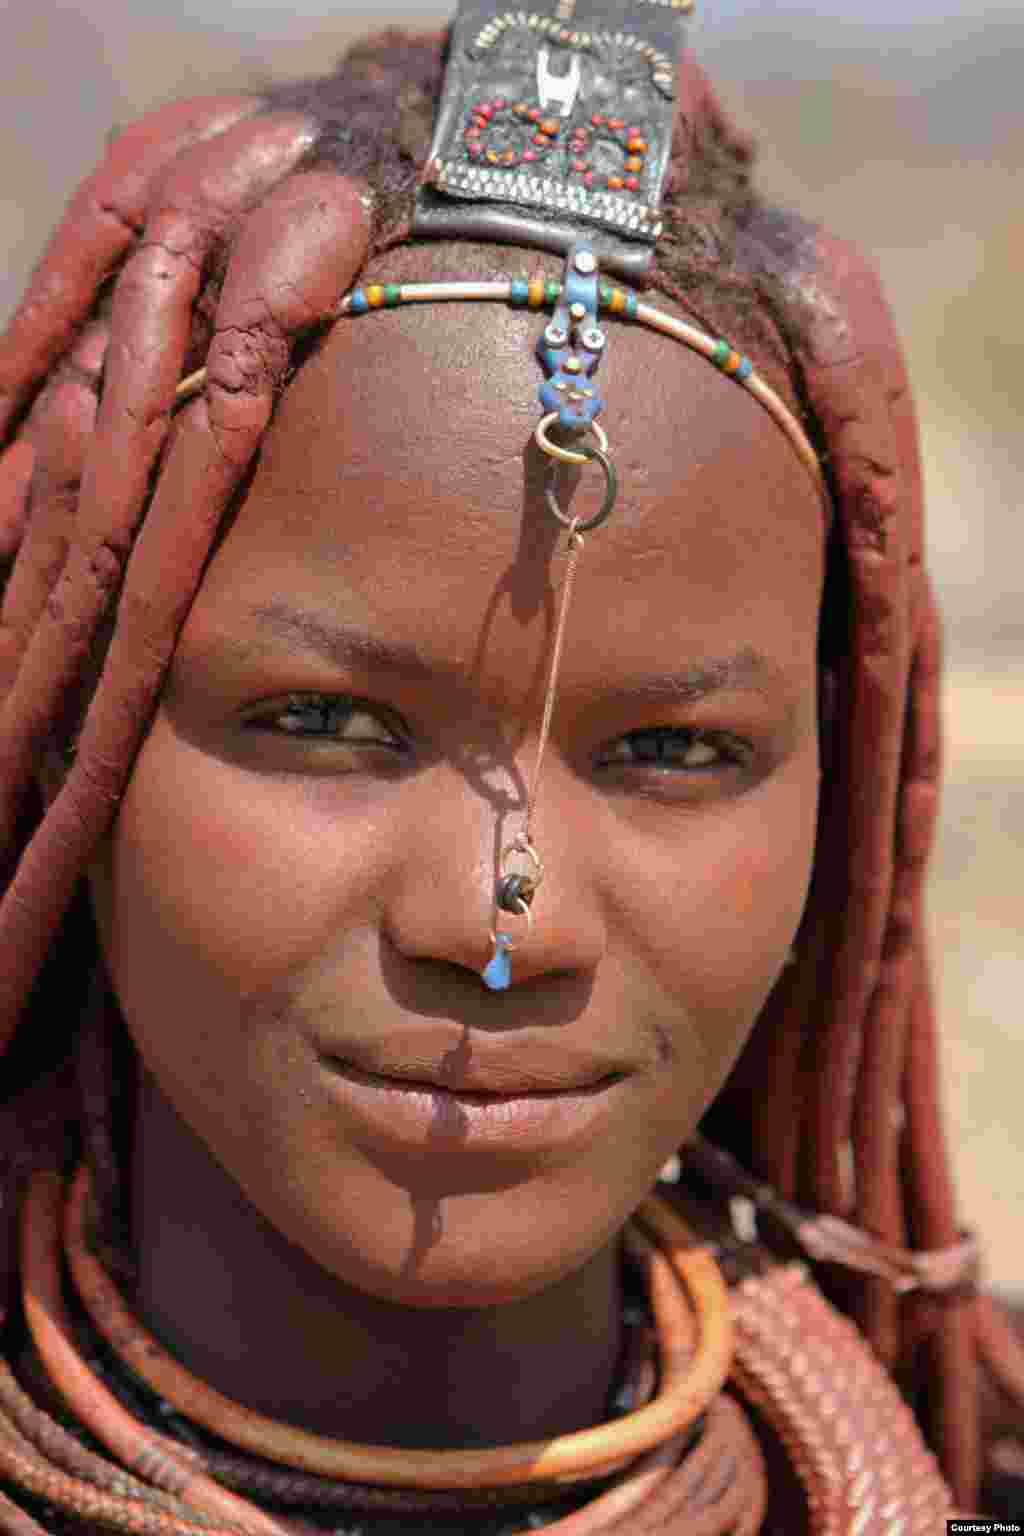 A young Himba girl smiles for a photo in northern Namibia near the Angola border (Jeff Leach/Nambibia/VOA reader)